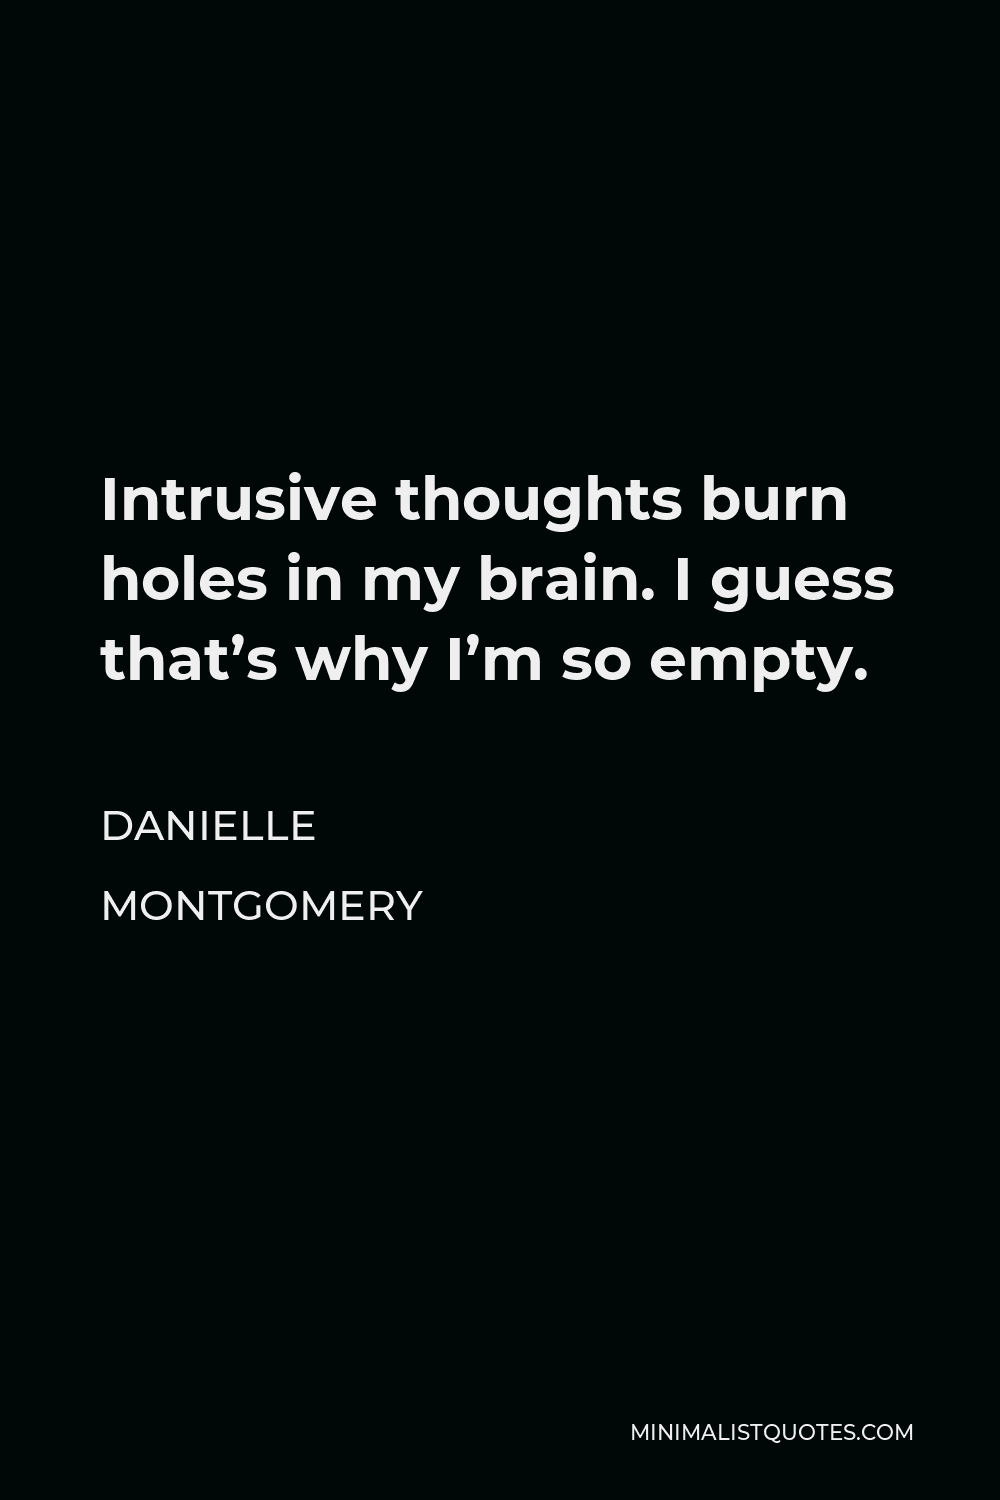 Danielle Montgomery Quote - Intrusive thoughts burn holes in my brain. I guess that’s why I’m so empty.